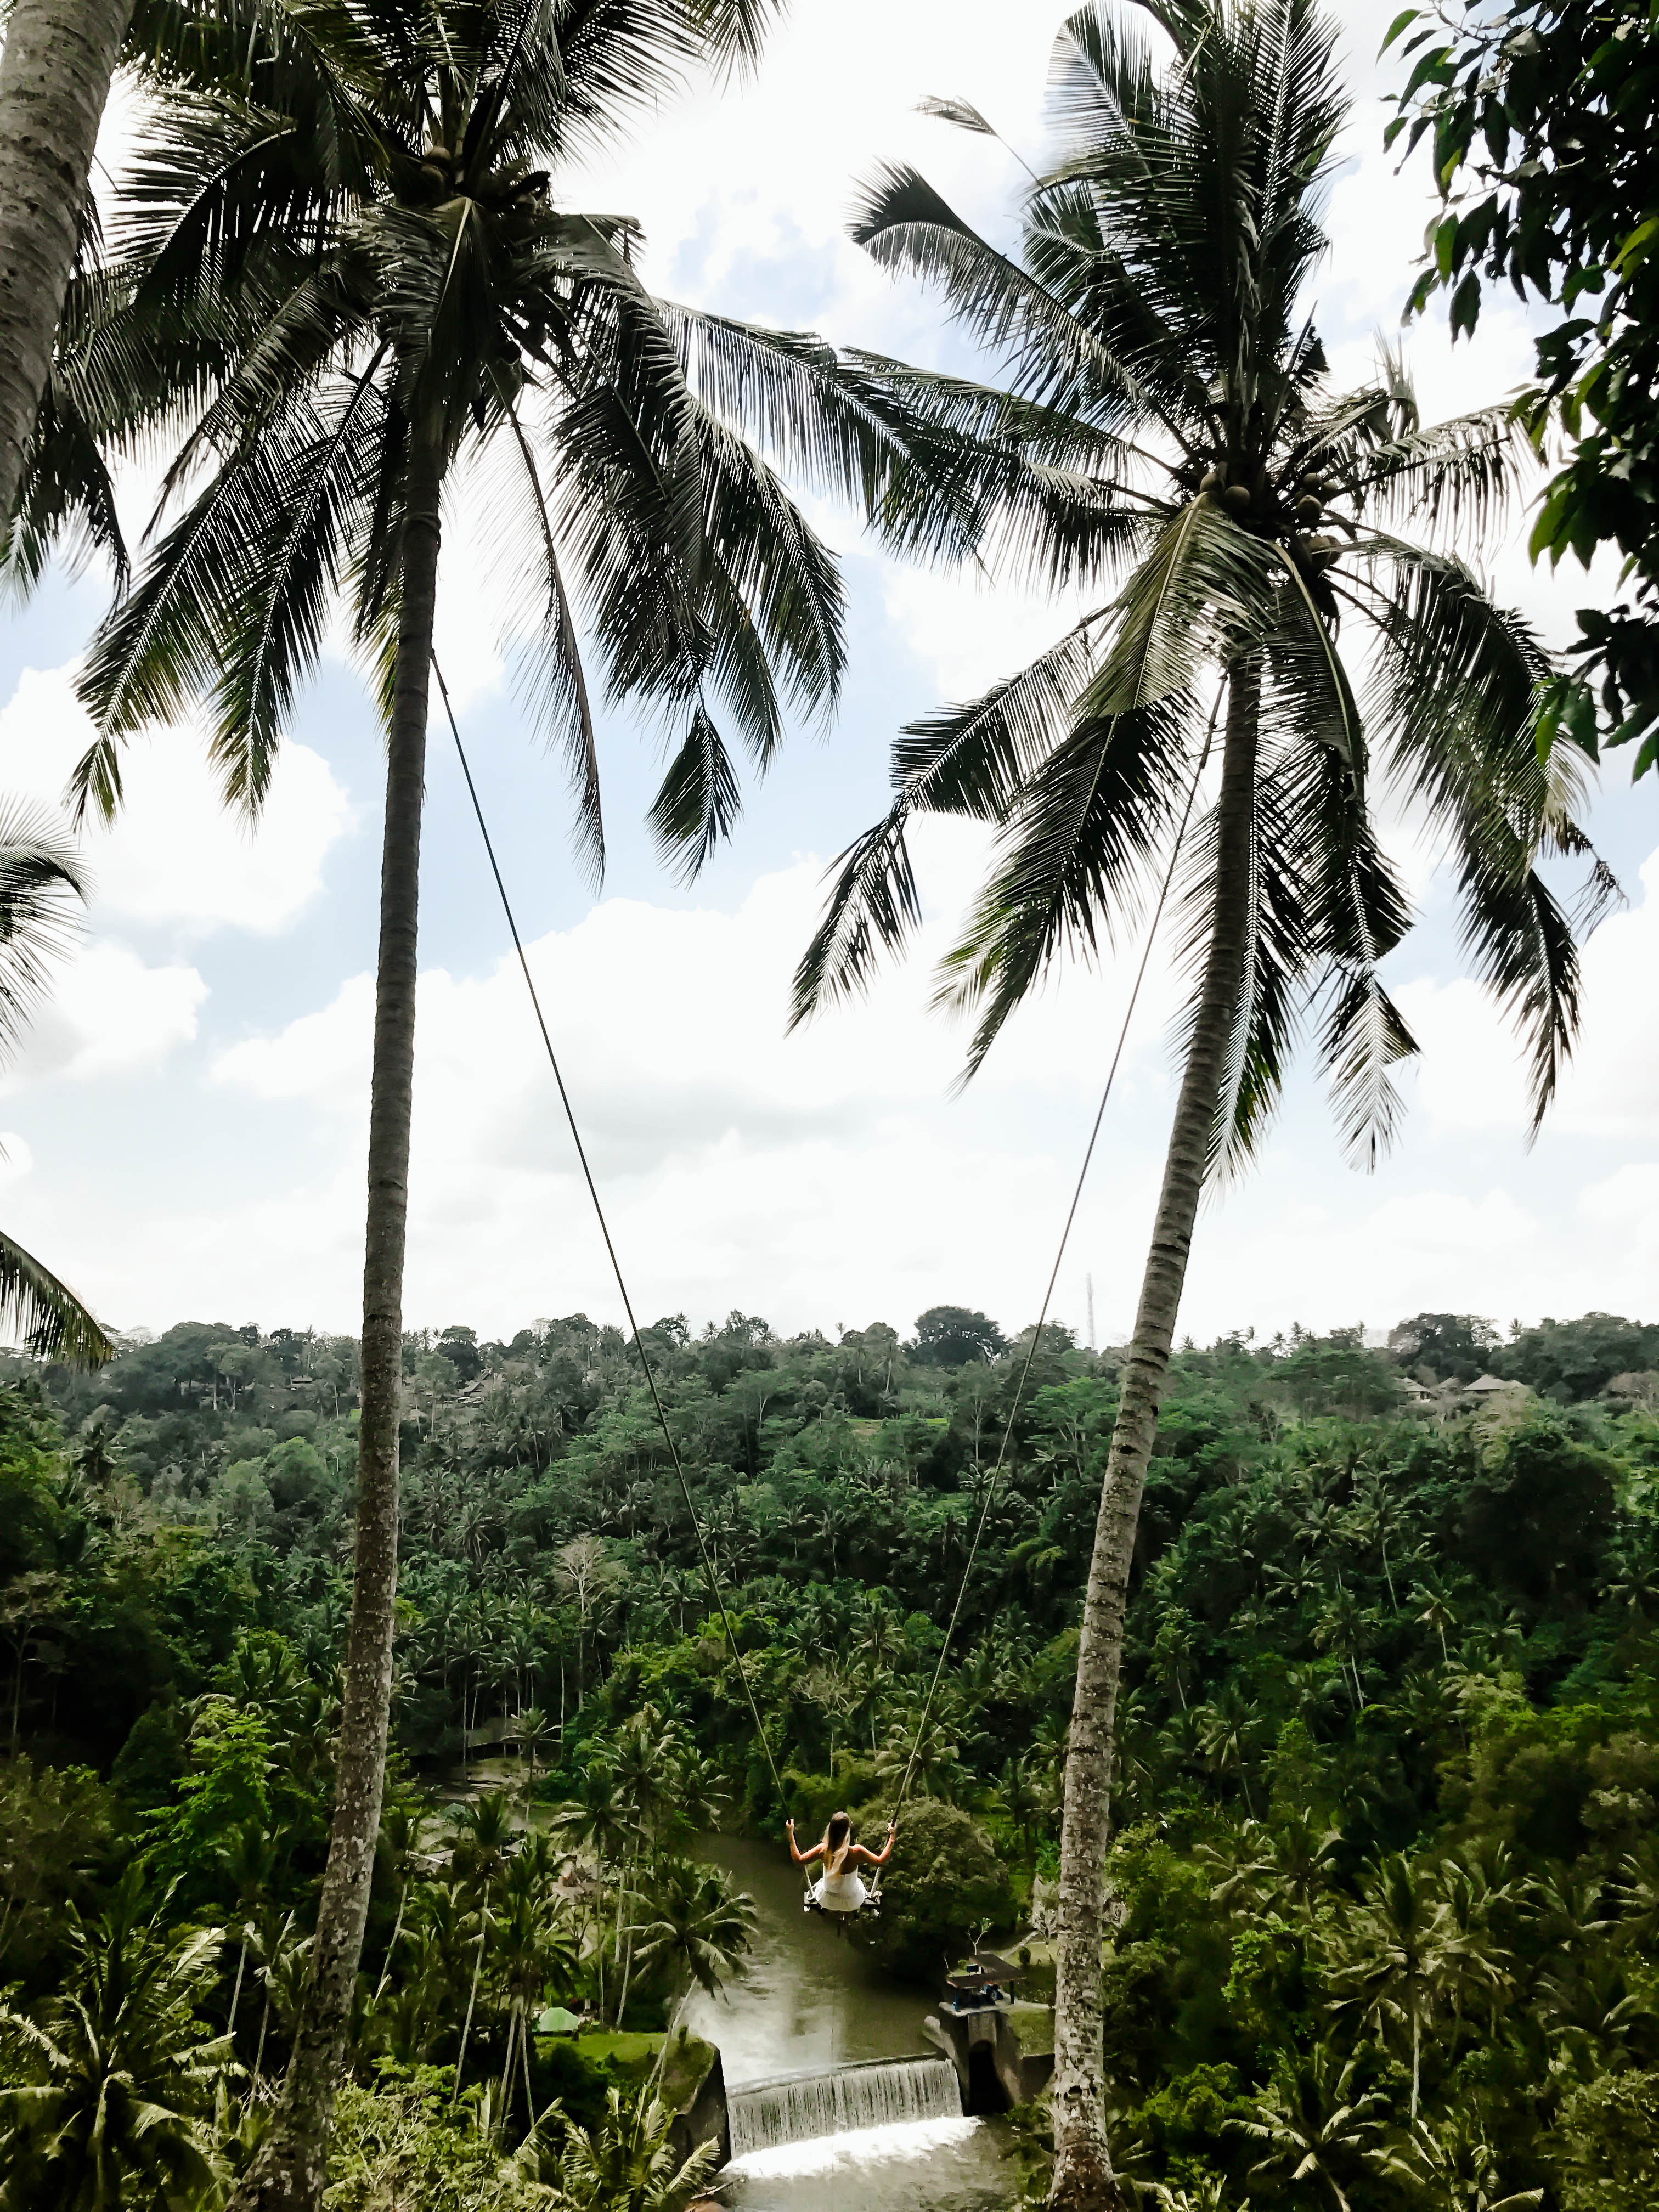 Last month, we had the opportunity to join No Desk Project, a startup coliving and coworking wellness retreat for entrepreneurs in Ubud, Bali while working at the Outpost coworking space with major jungle vibes - right up our alley!